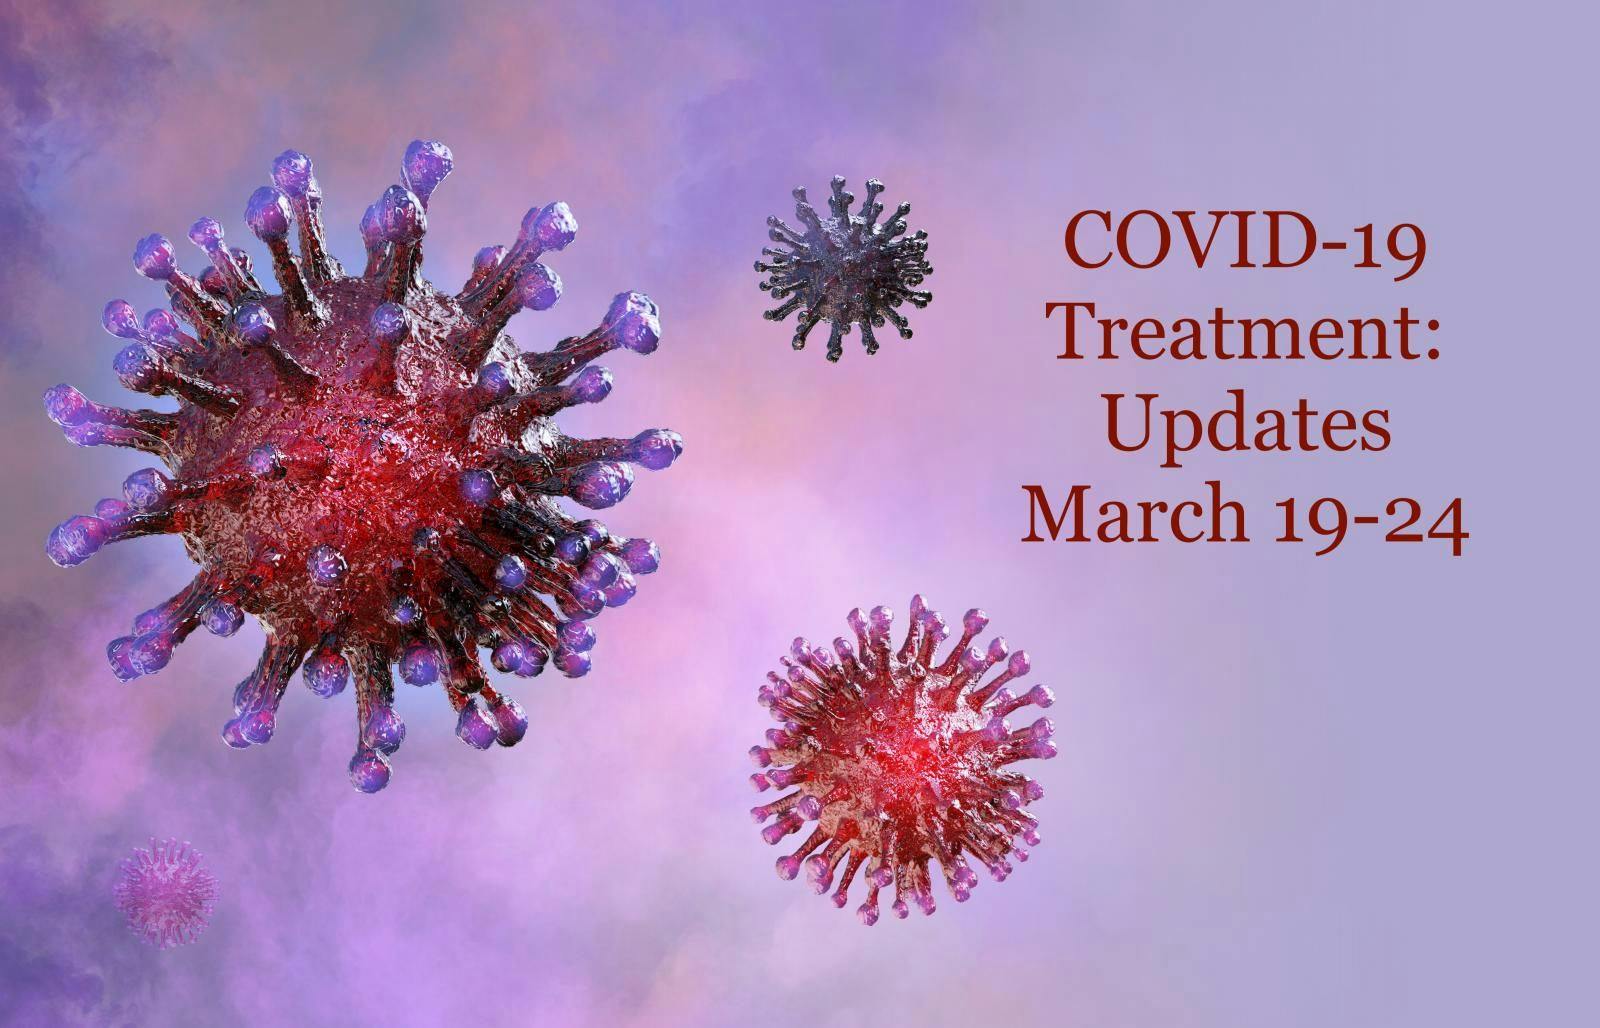 COVID-19 Treatment: Updates March 19-24, 2020